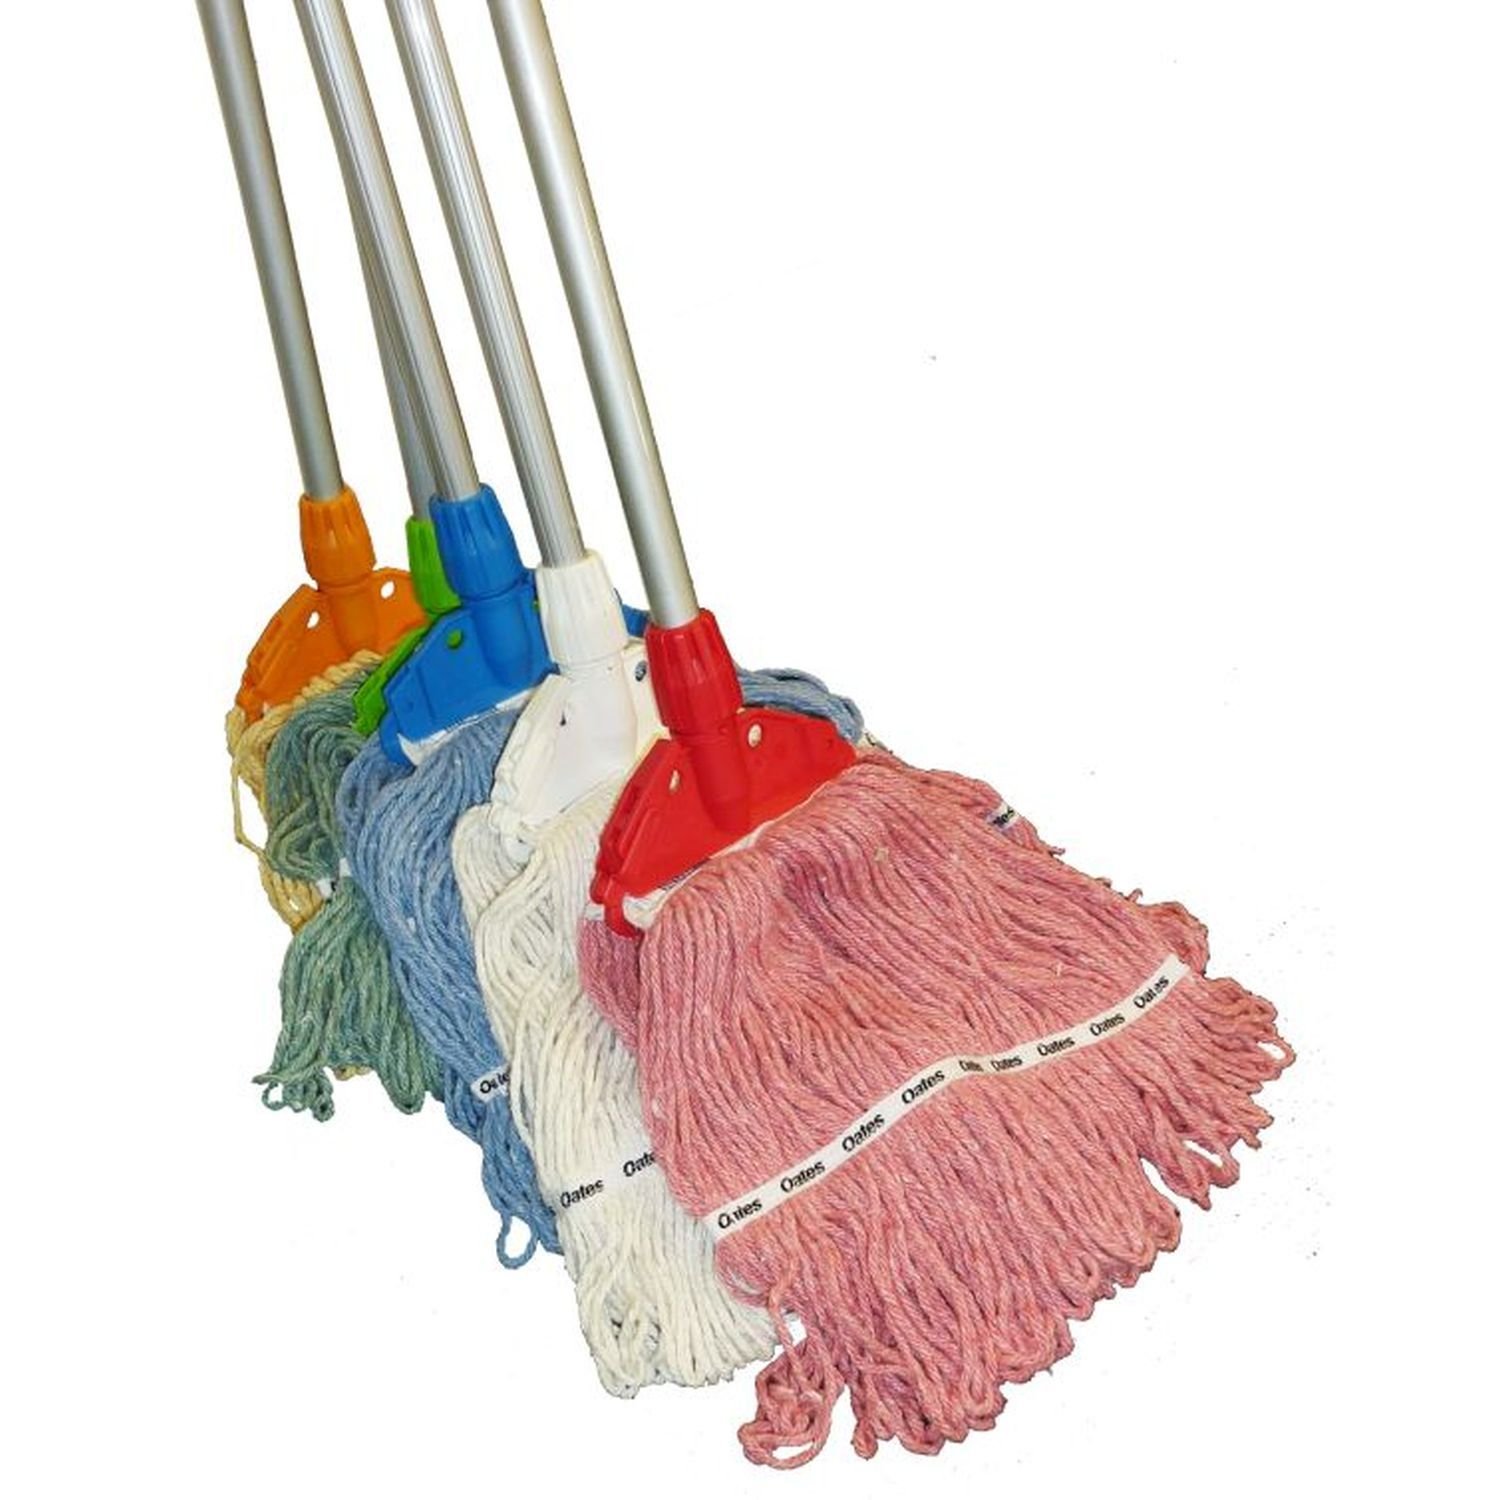 Kentucky Launder Mop 400g Complete with CT Handle & Holder